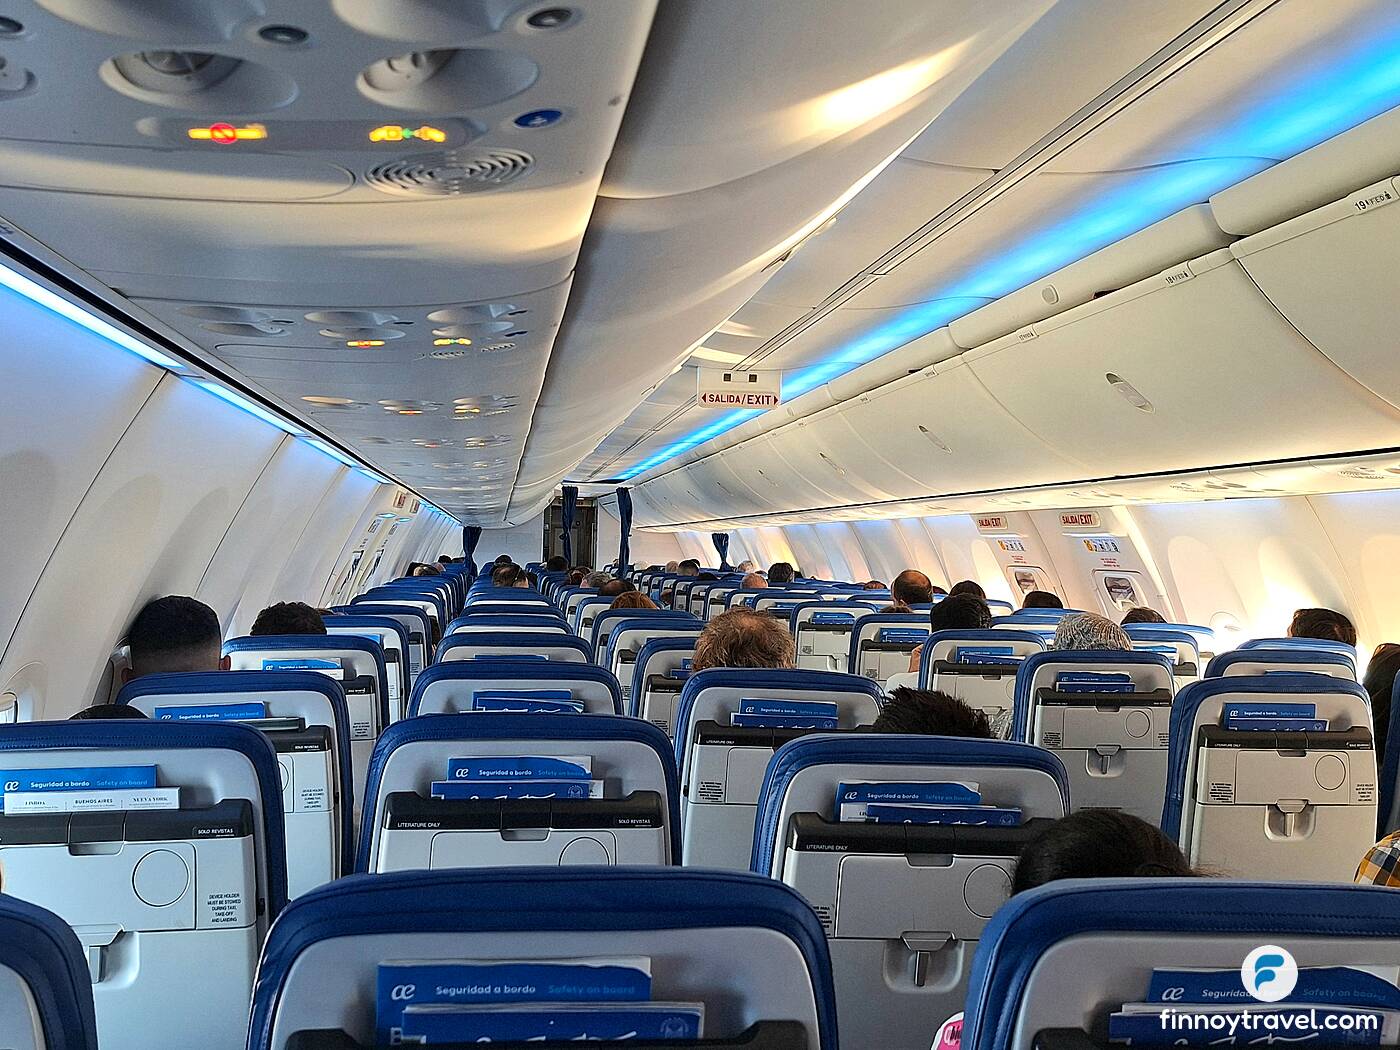 The cabin of Air Europa Boeing 737